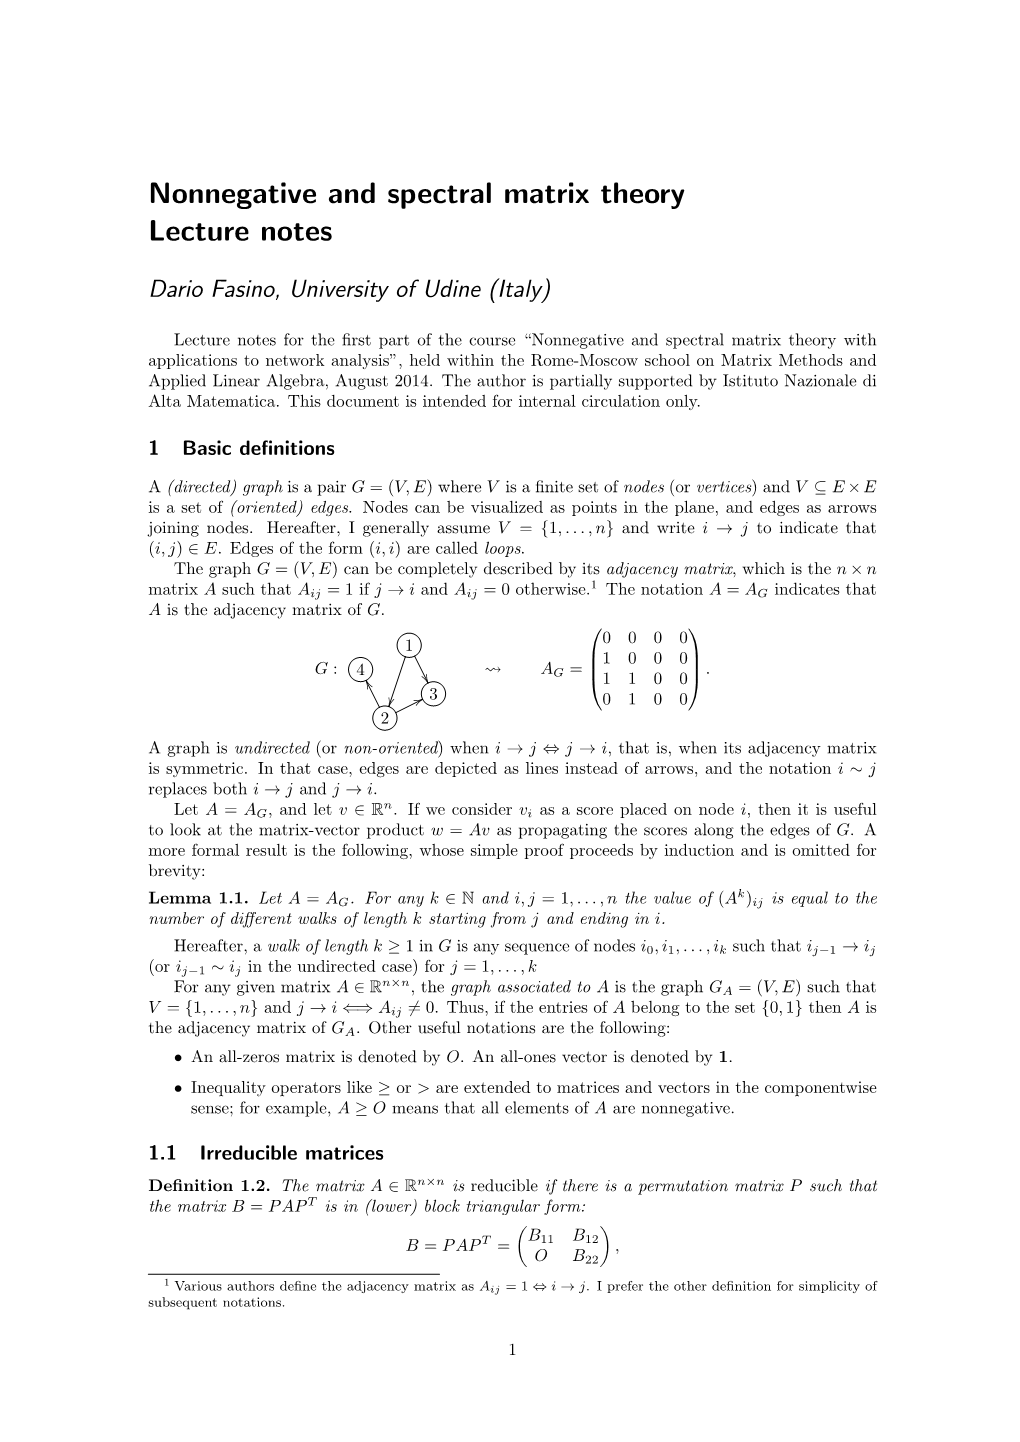 Nonnegative and Spectral Matrix Theory Lecture Notes